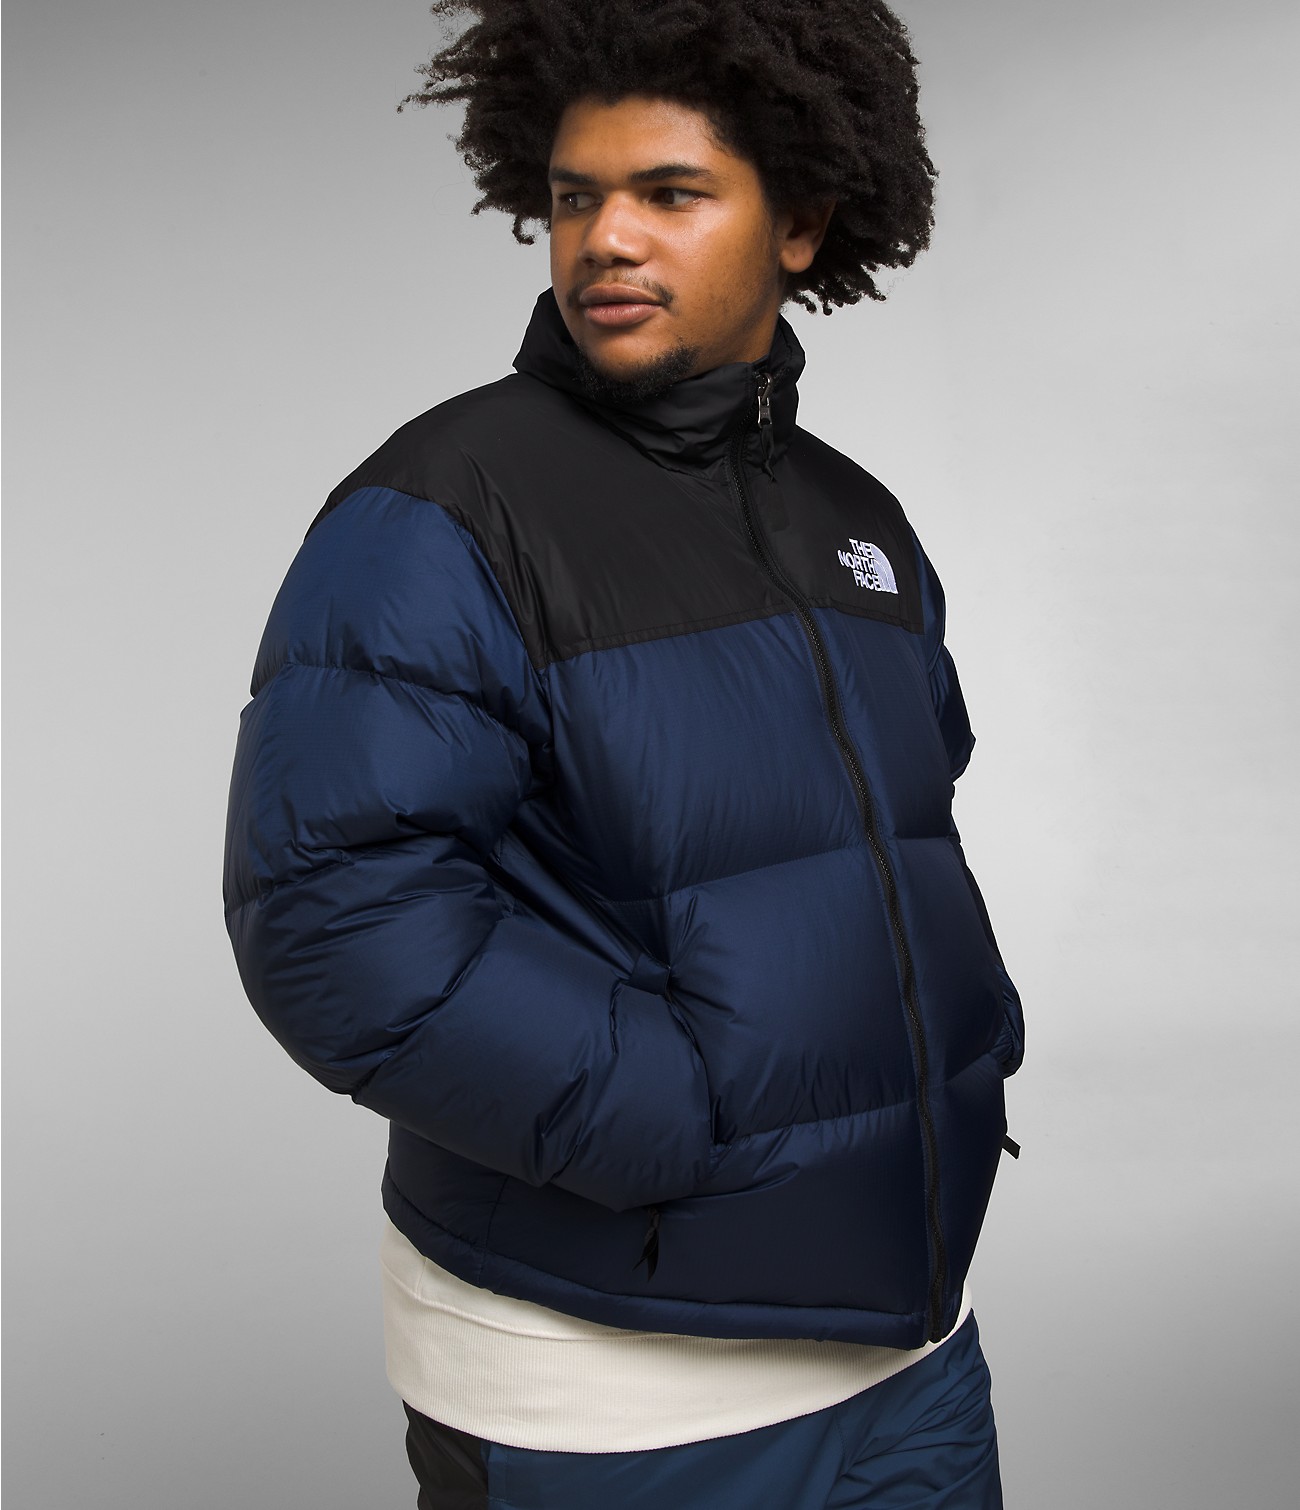 Unlock Wilderness' choice in the Point Zero Vs North Face comparison, the 1996 Retro Nuptse Jacket by The North Face